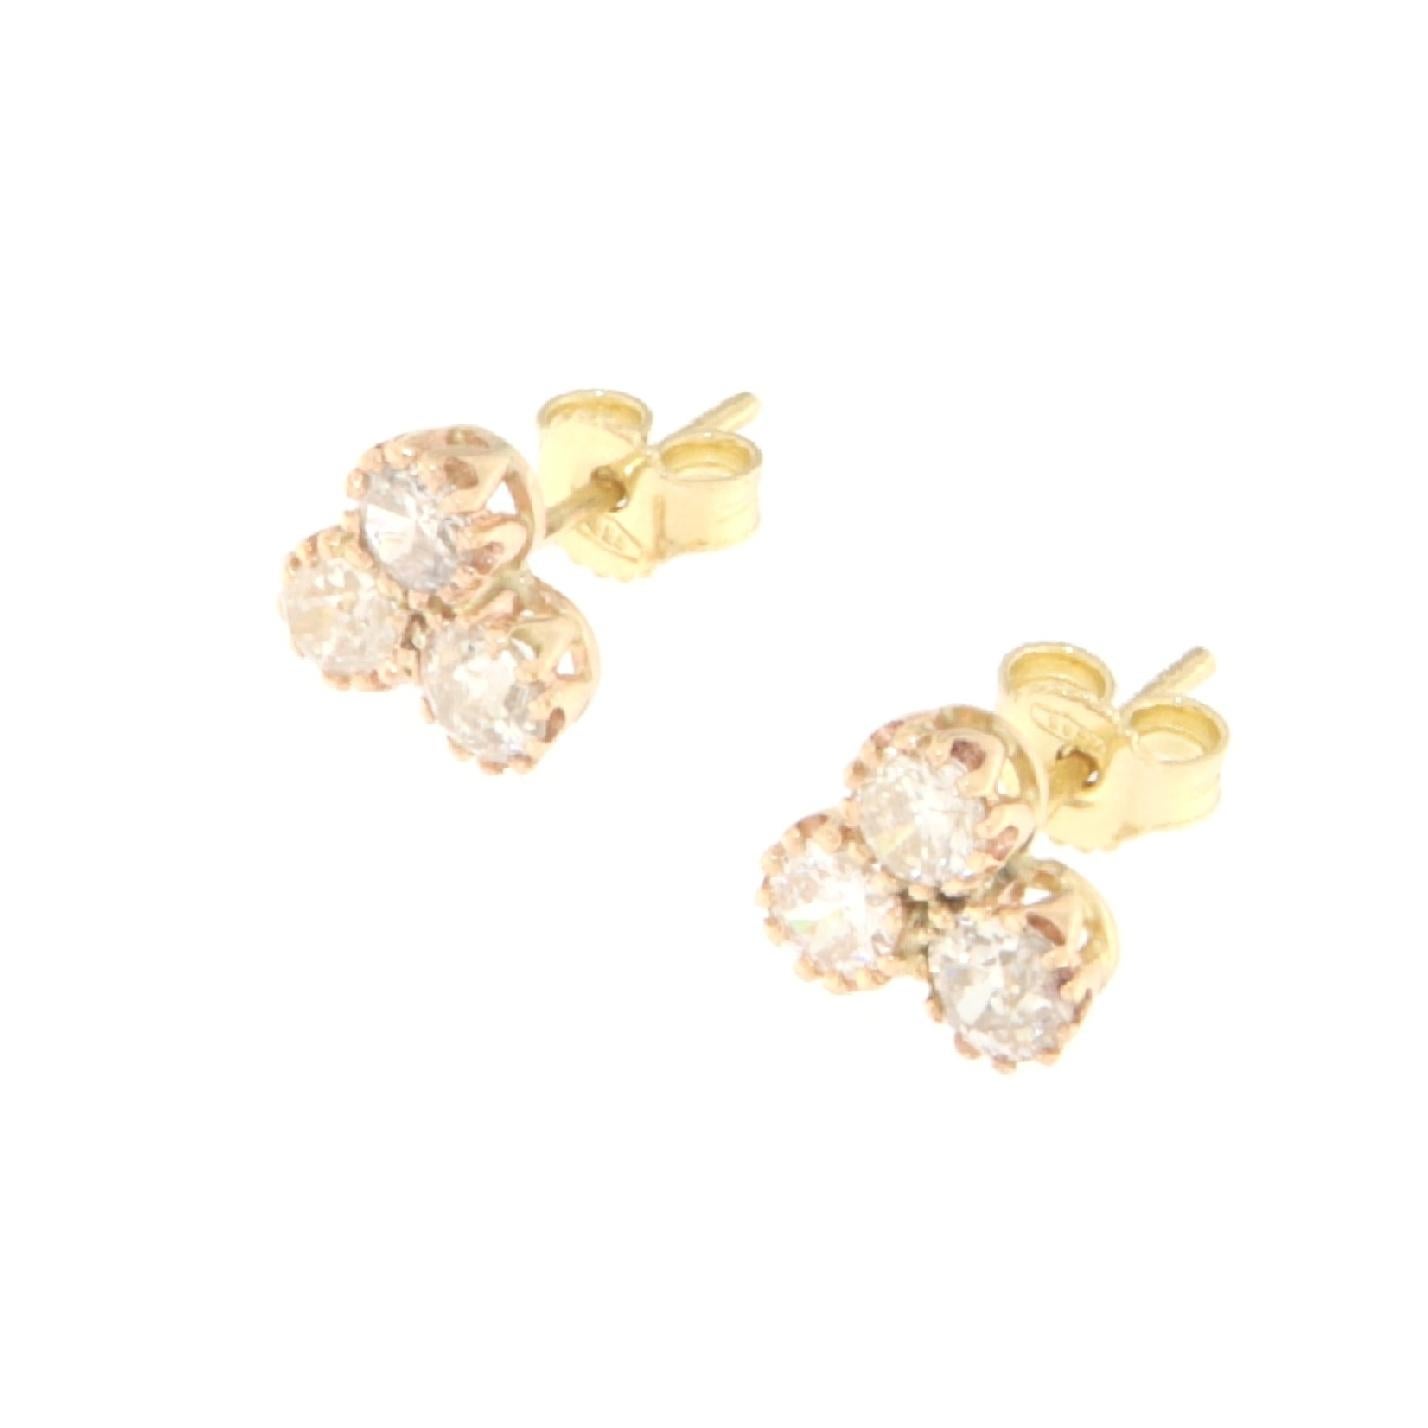 These elegant earrings are crafted from 14-karat yellow gold and feature a cluster of sparkling brilliant-cut diamonds. Each earring is designed to capture and reflect light, providing a dazzling display that is perfect for any occasion, from